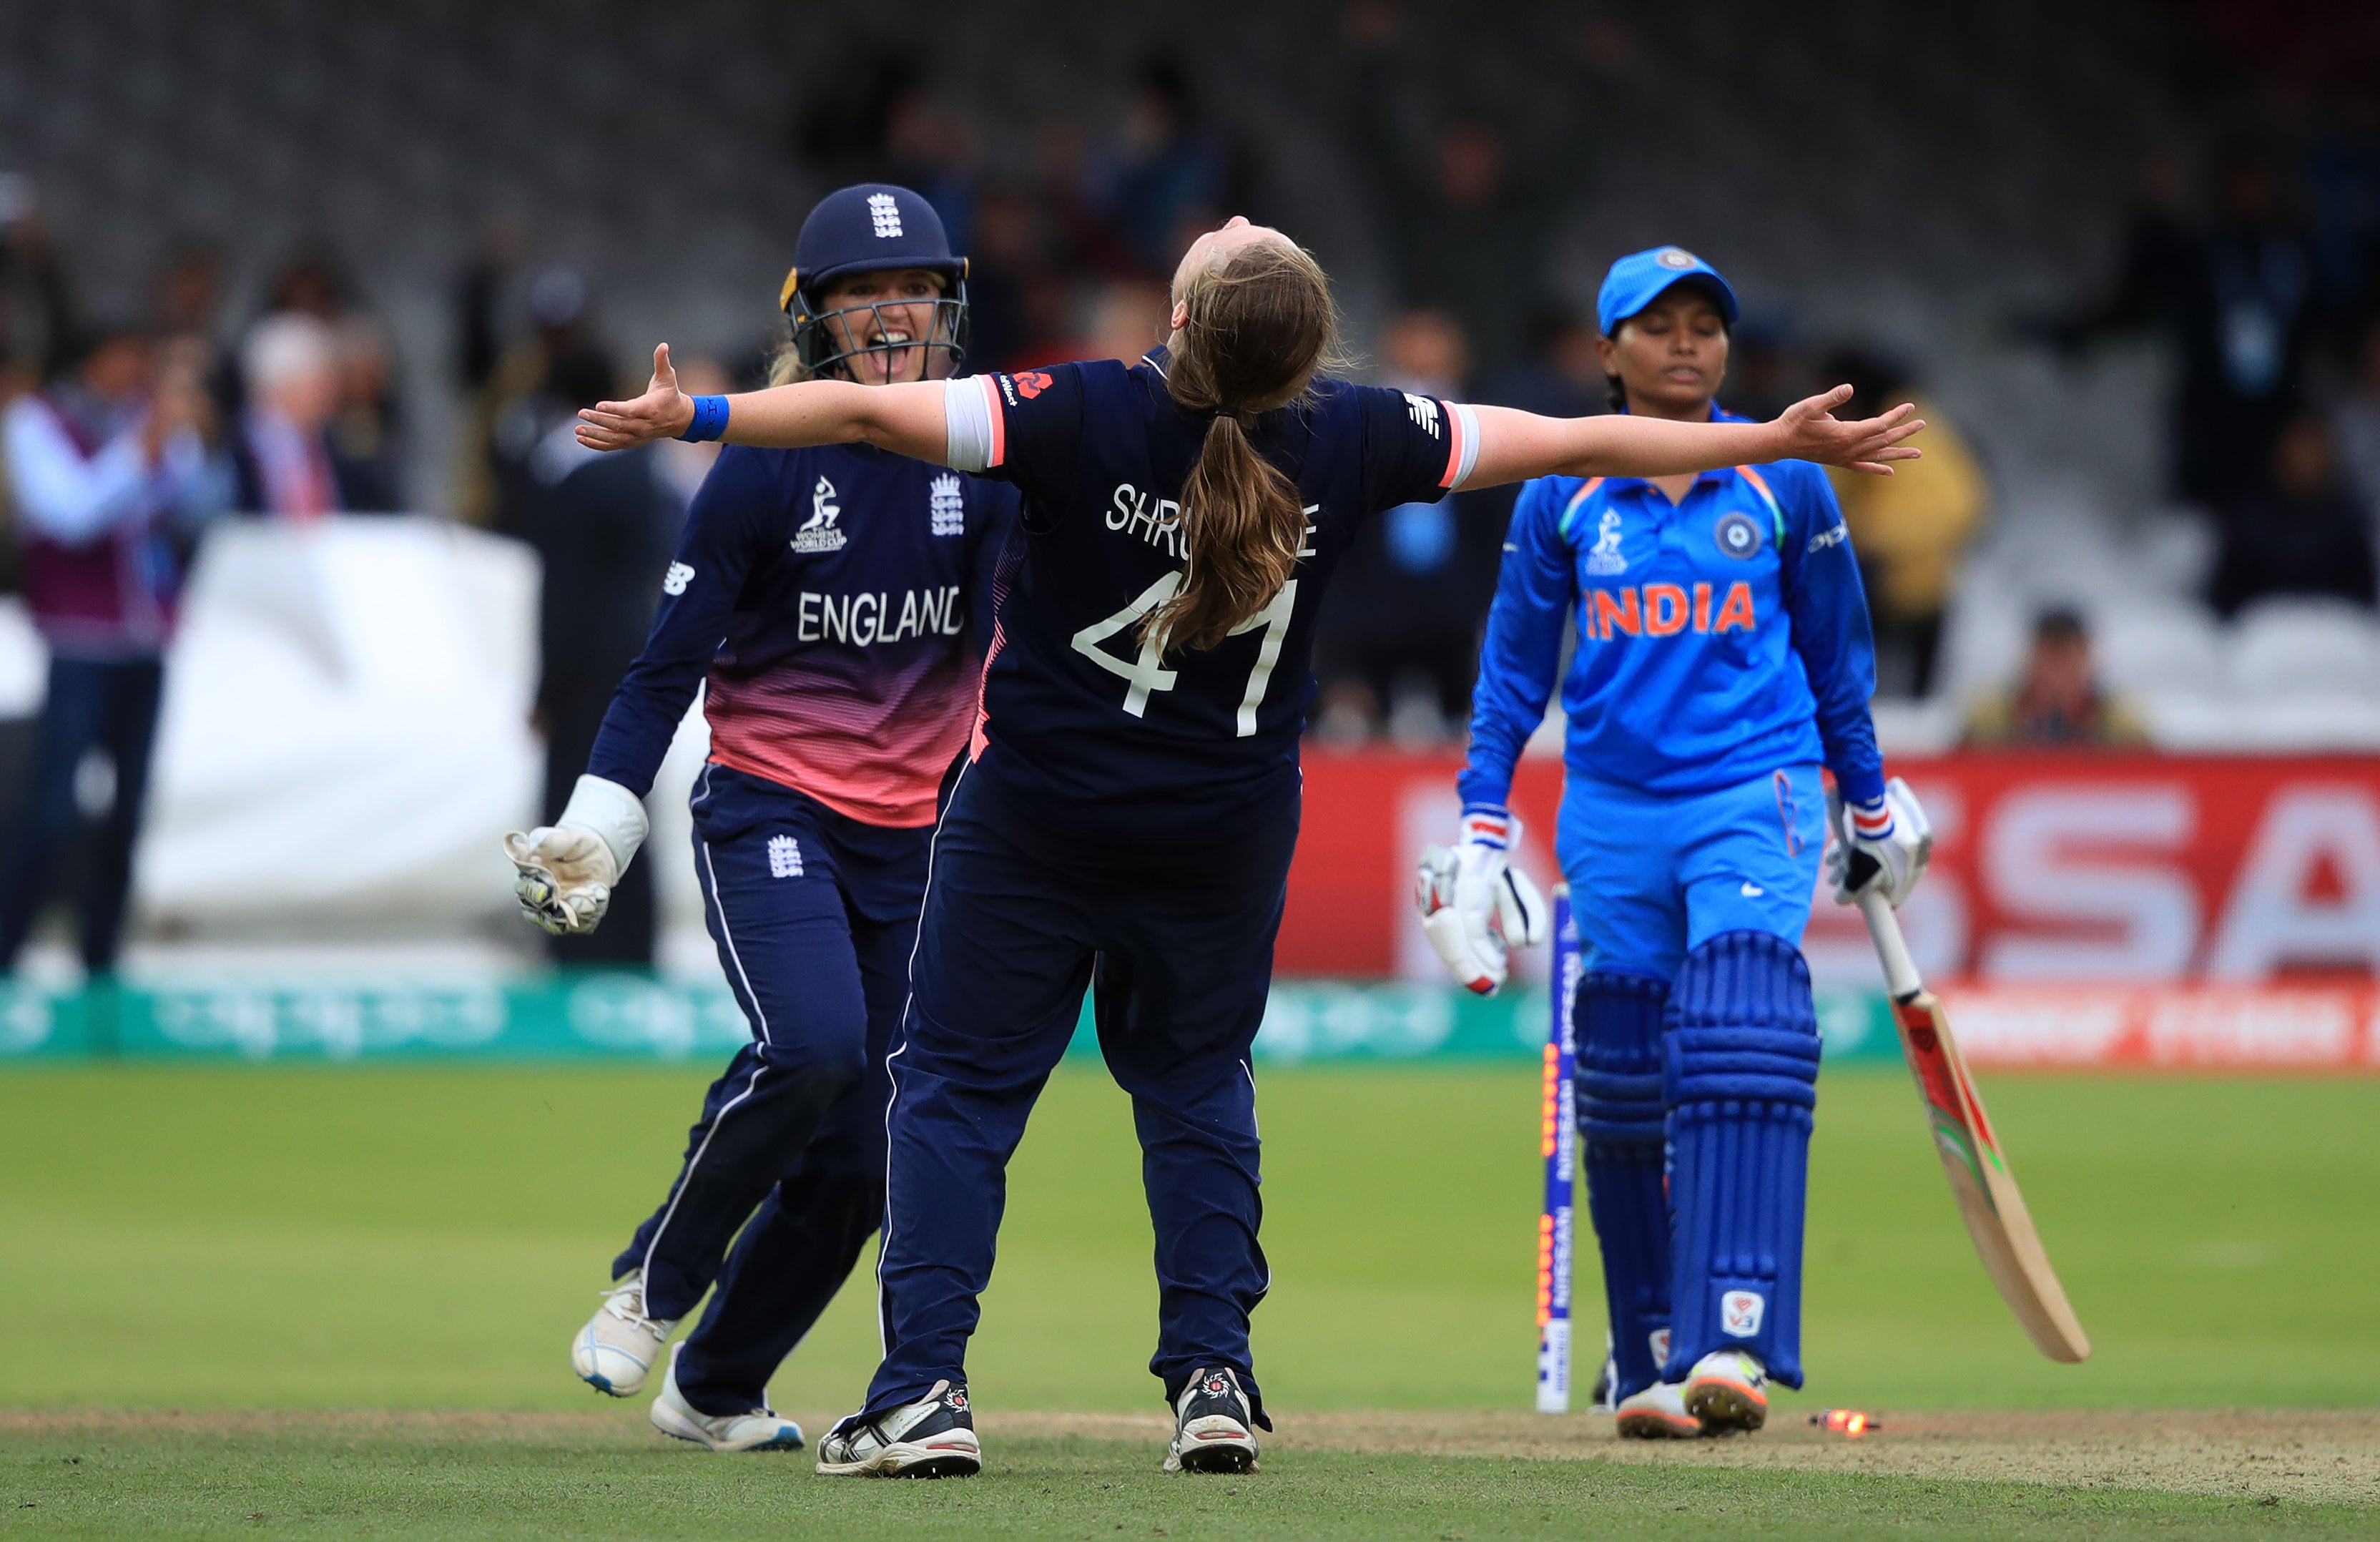 Shrubsole took six for 42 as England beat India in the final of the last World Cup in 2017 (John Walton/PA)